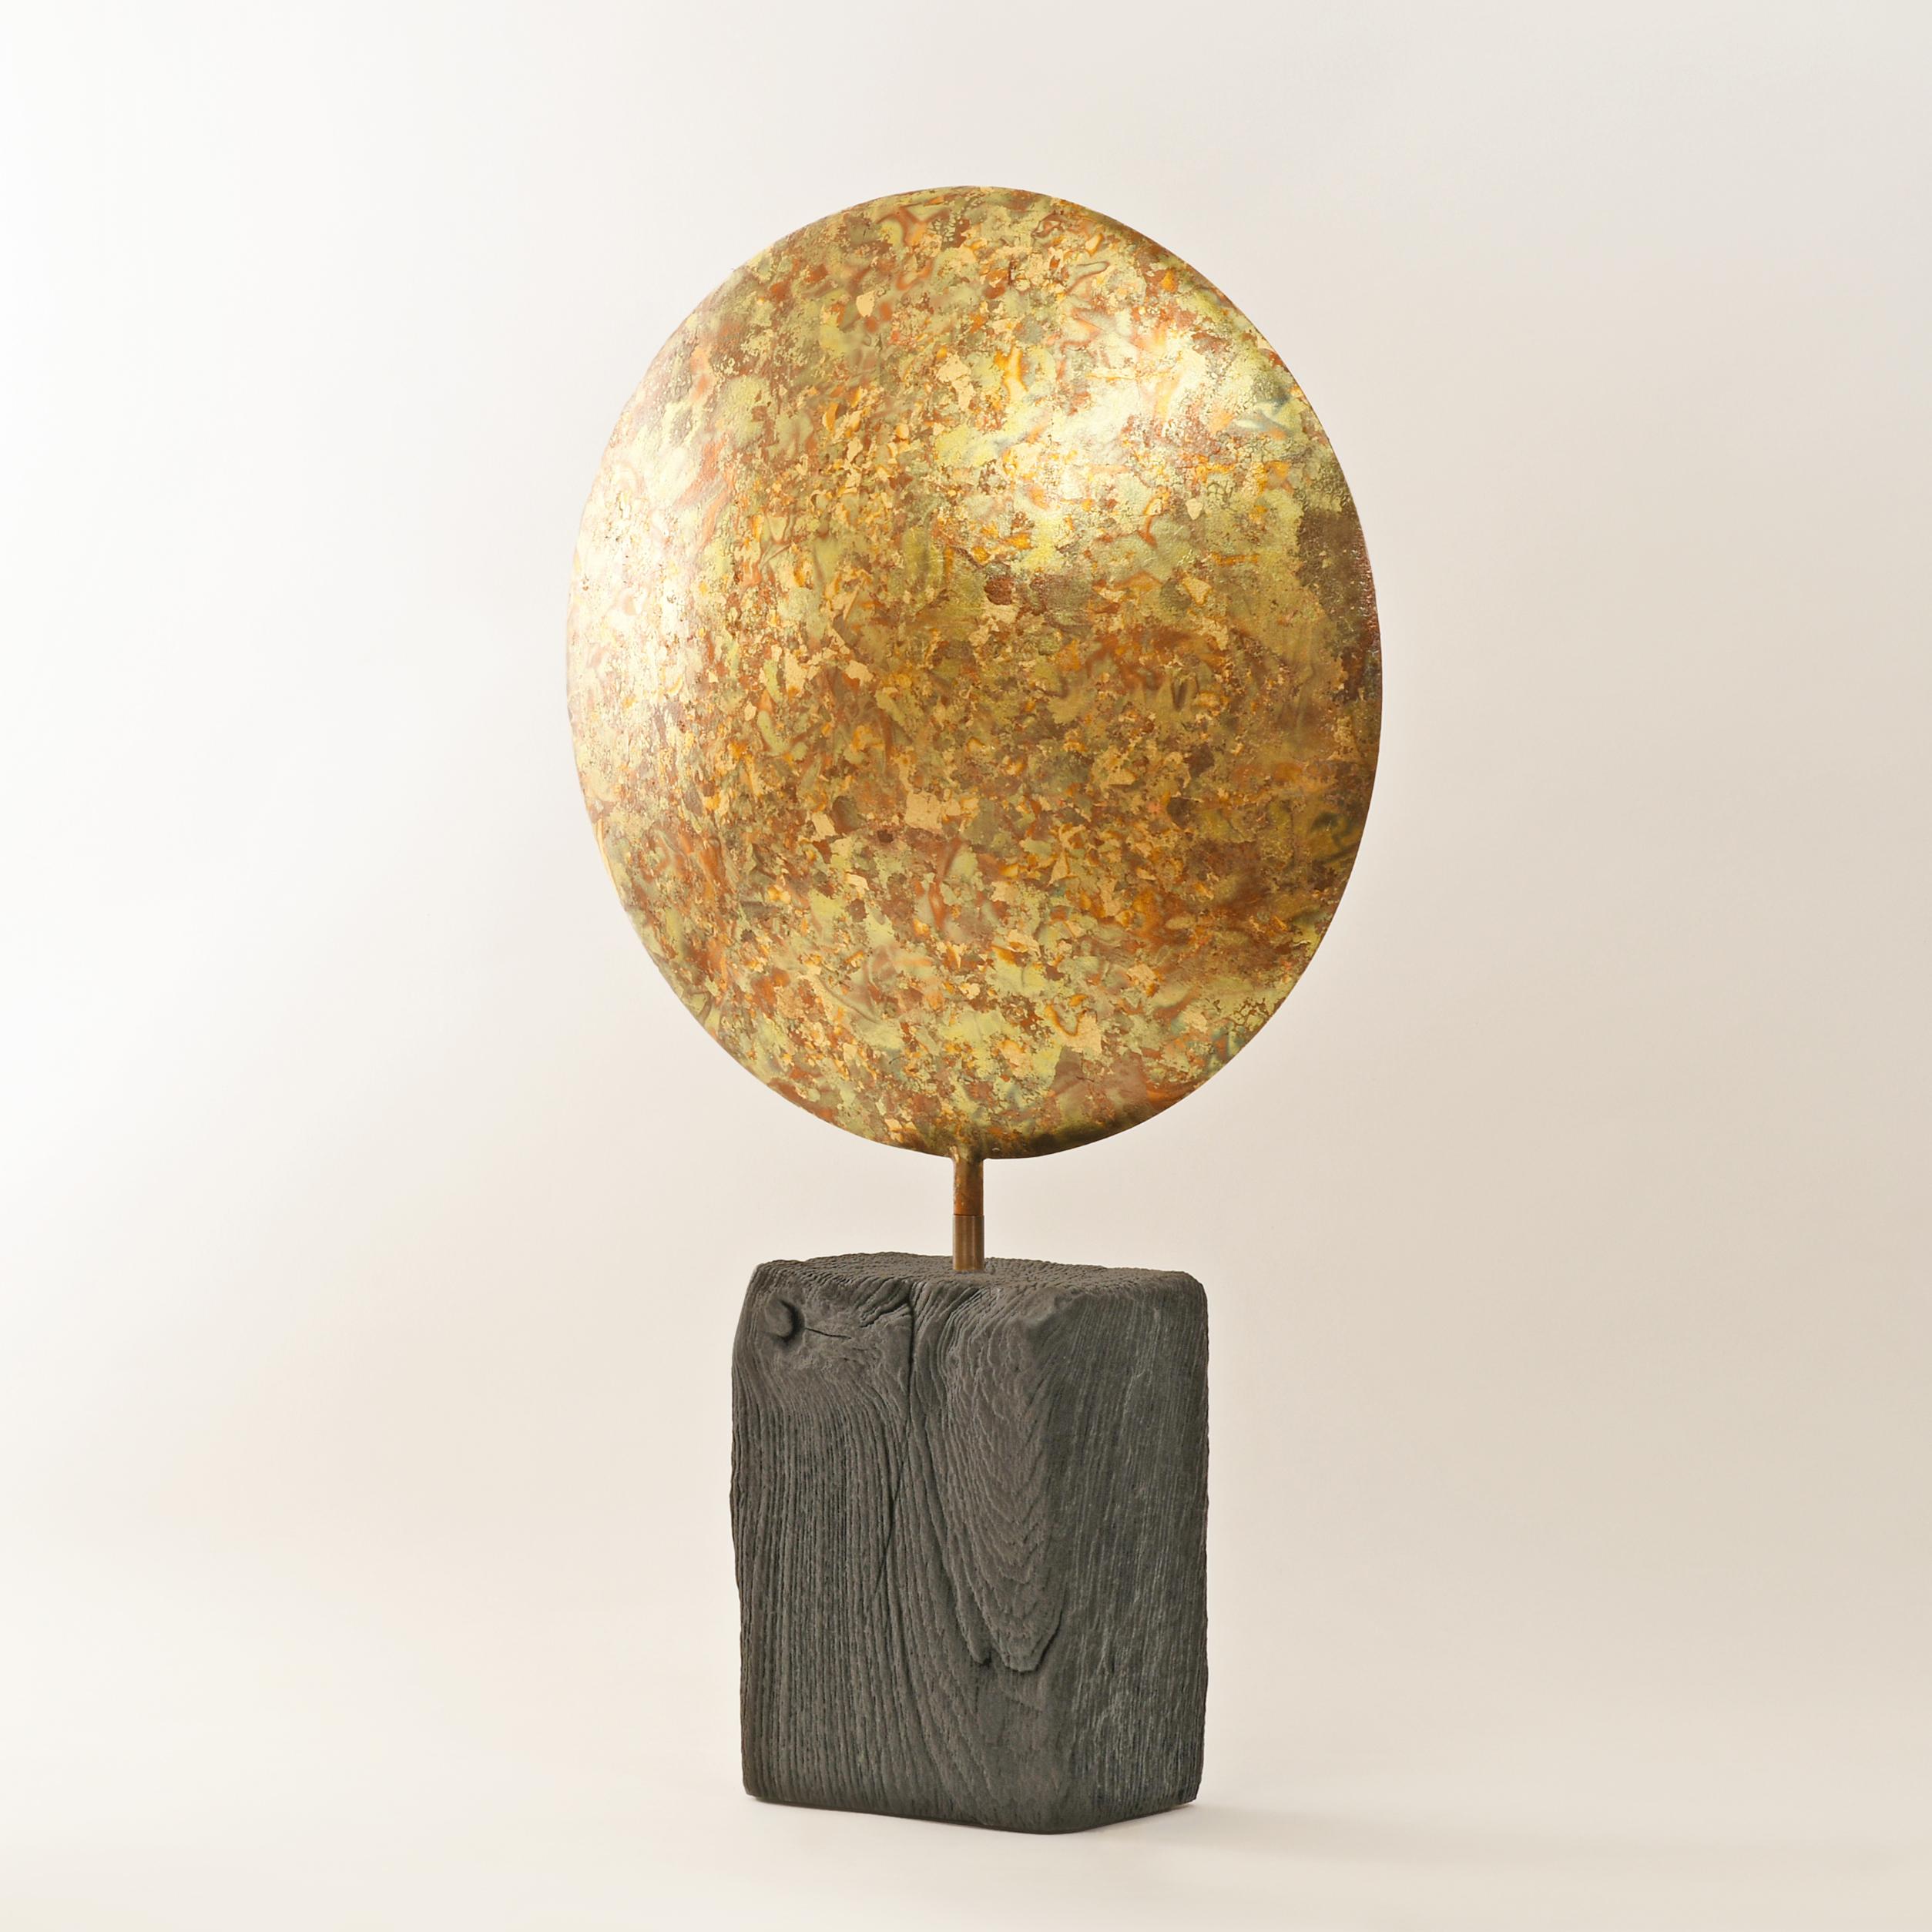 British Contemporary Sculpture by Philip Hearsey - Skyfire II For Sale 1